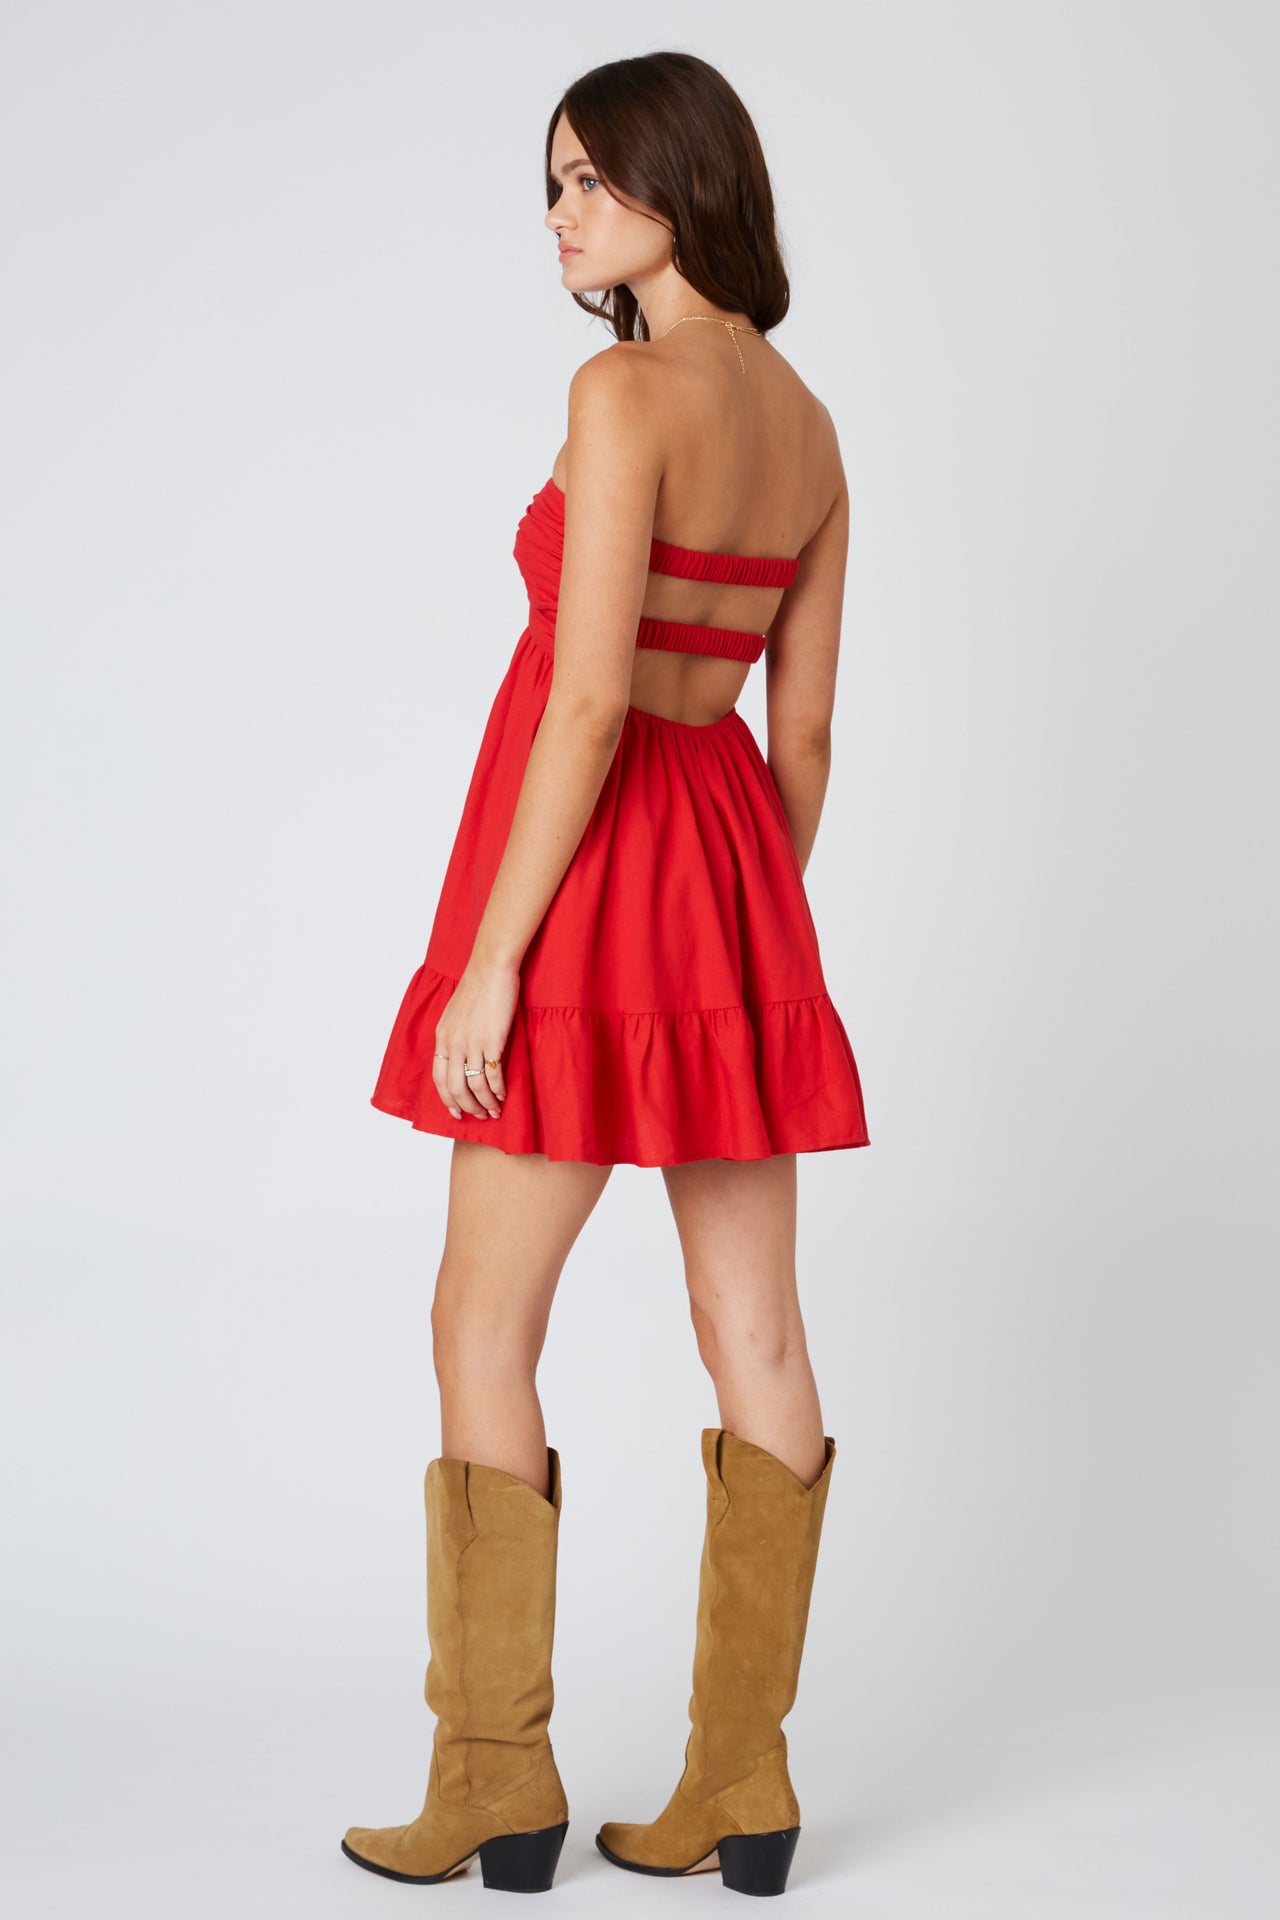 Whitney Romper Red, Romper Dress by Cotton Candy | LIT Boutique